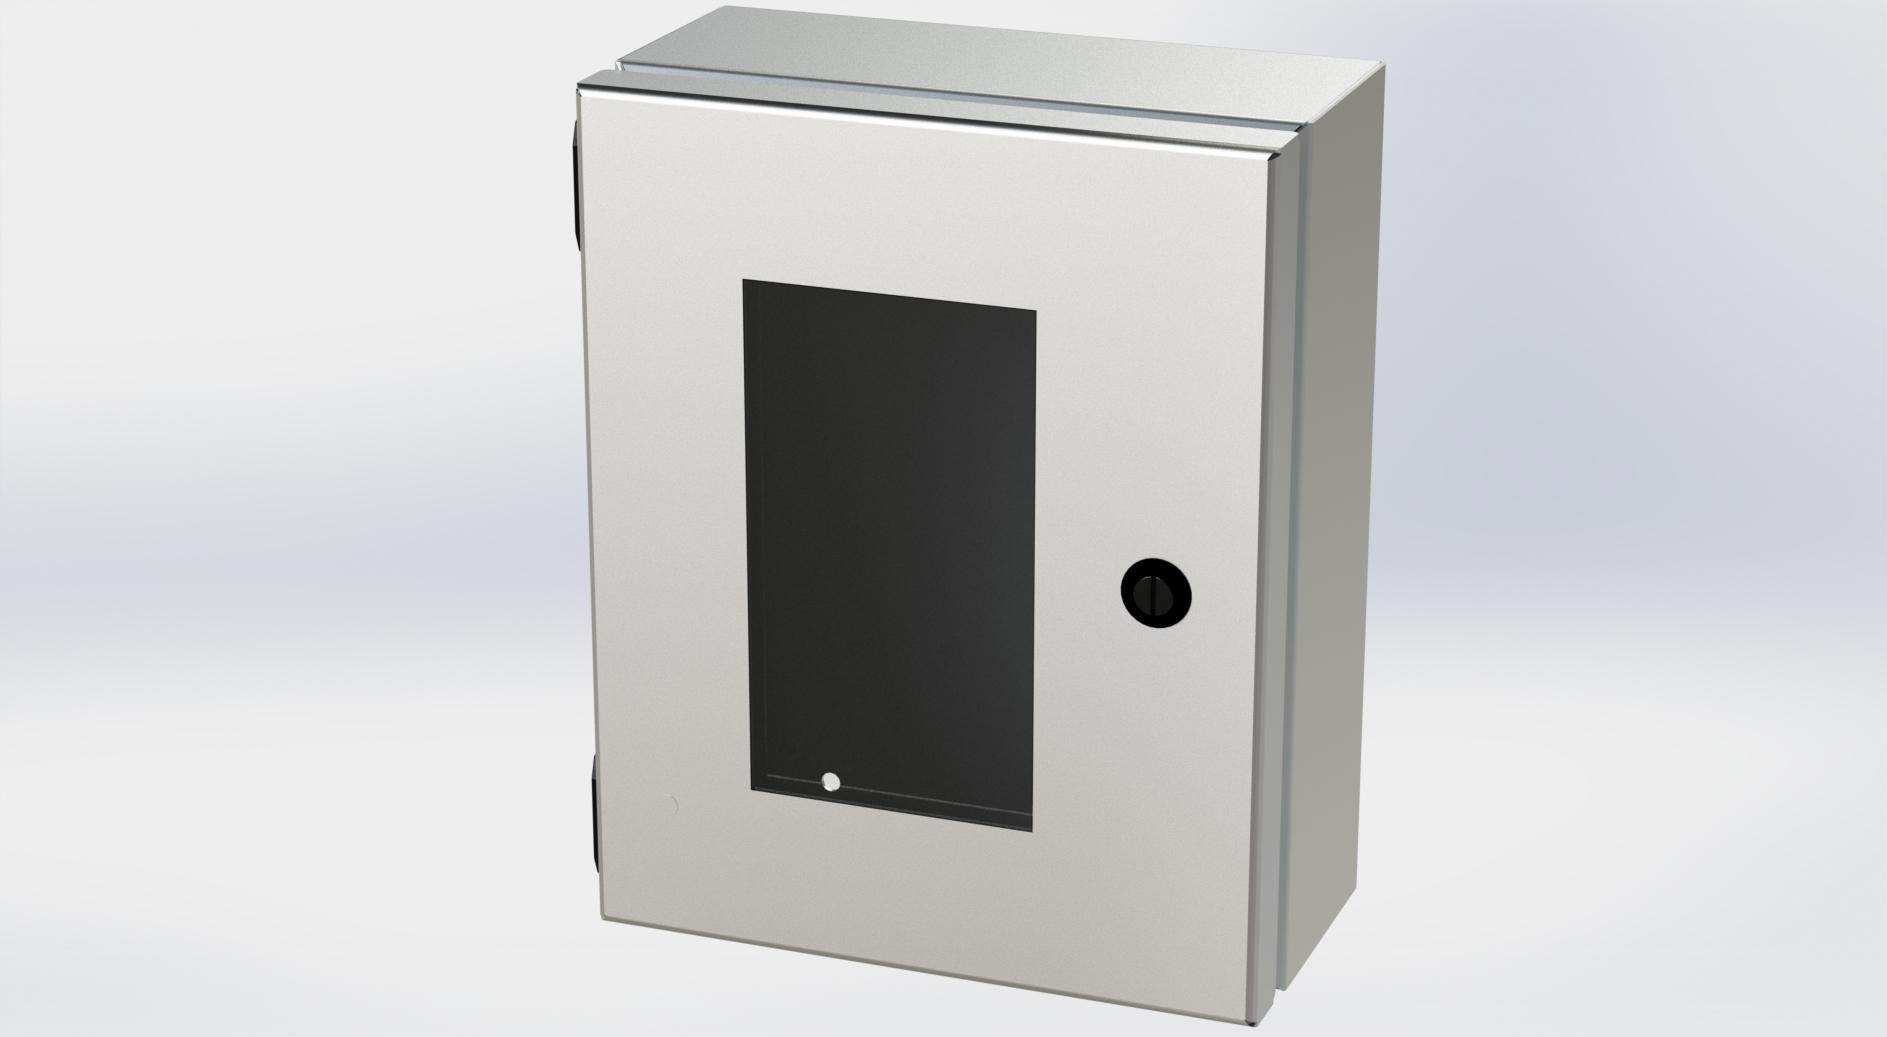 Saginaw Control SCE-1008ELJWSS S.S. ELJ Enclosure W/Viewing Window, Height:10.00", Width:8.00", Depth:4.00", #4 brushed finish on all exterior surfaces. Optional sub-panels are powder coated white.